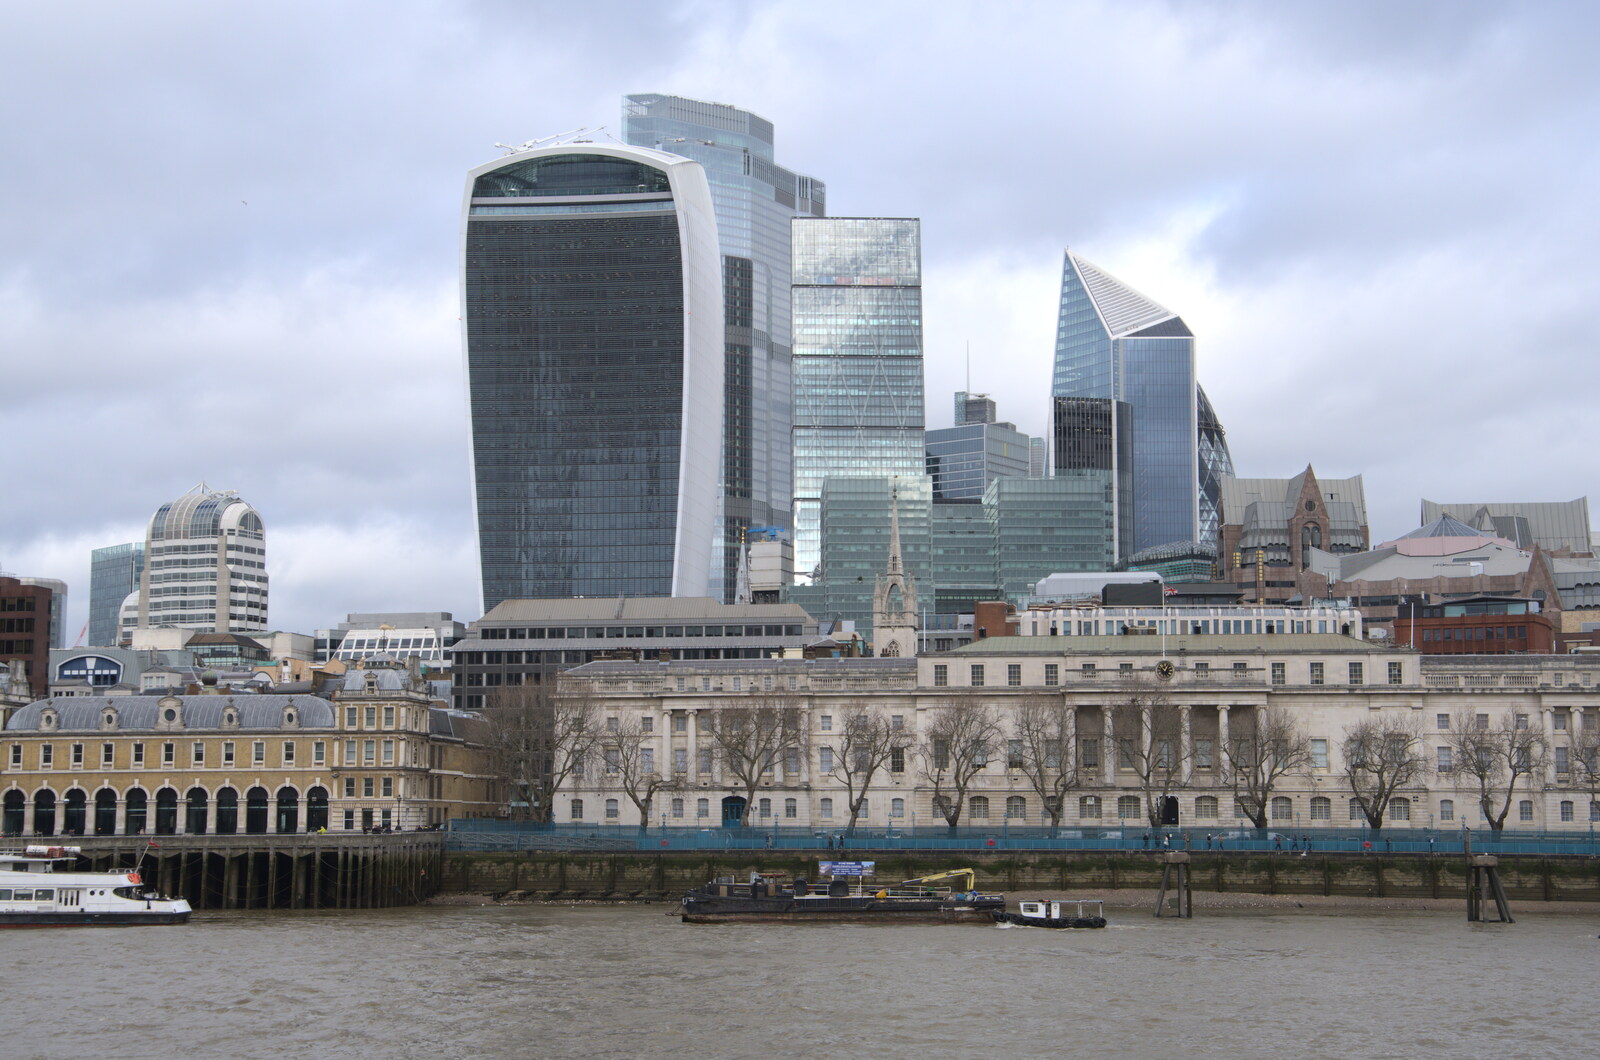 Buildings in East Cheap from HMS Belfast and the South Bank, Southwark, London - 17th February 2020